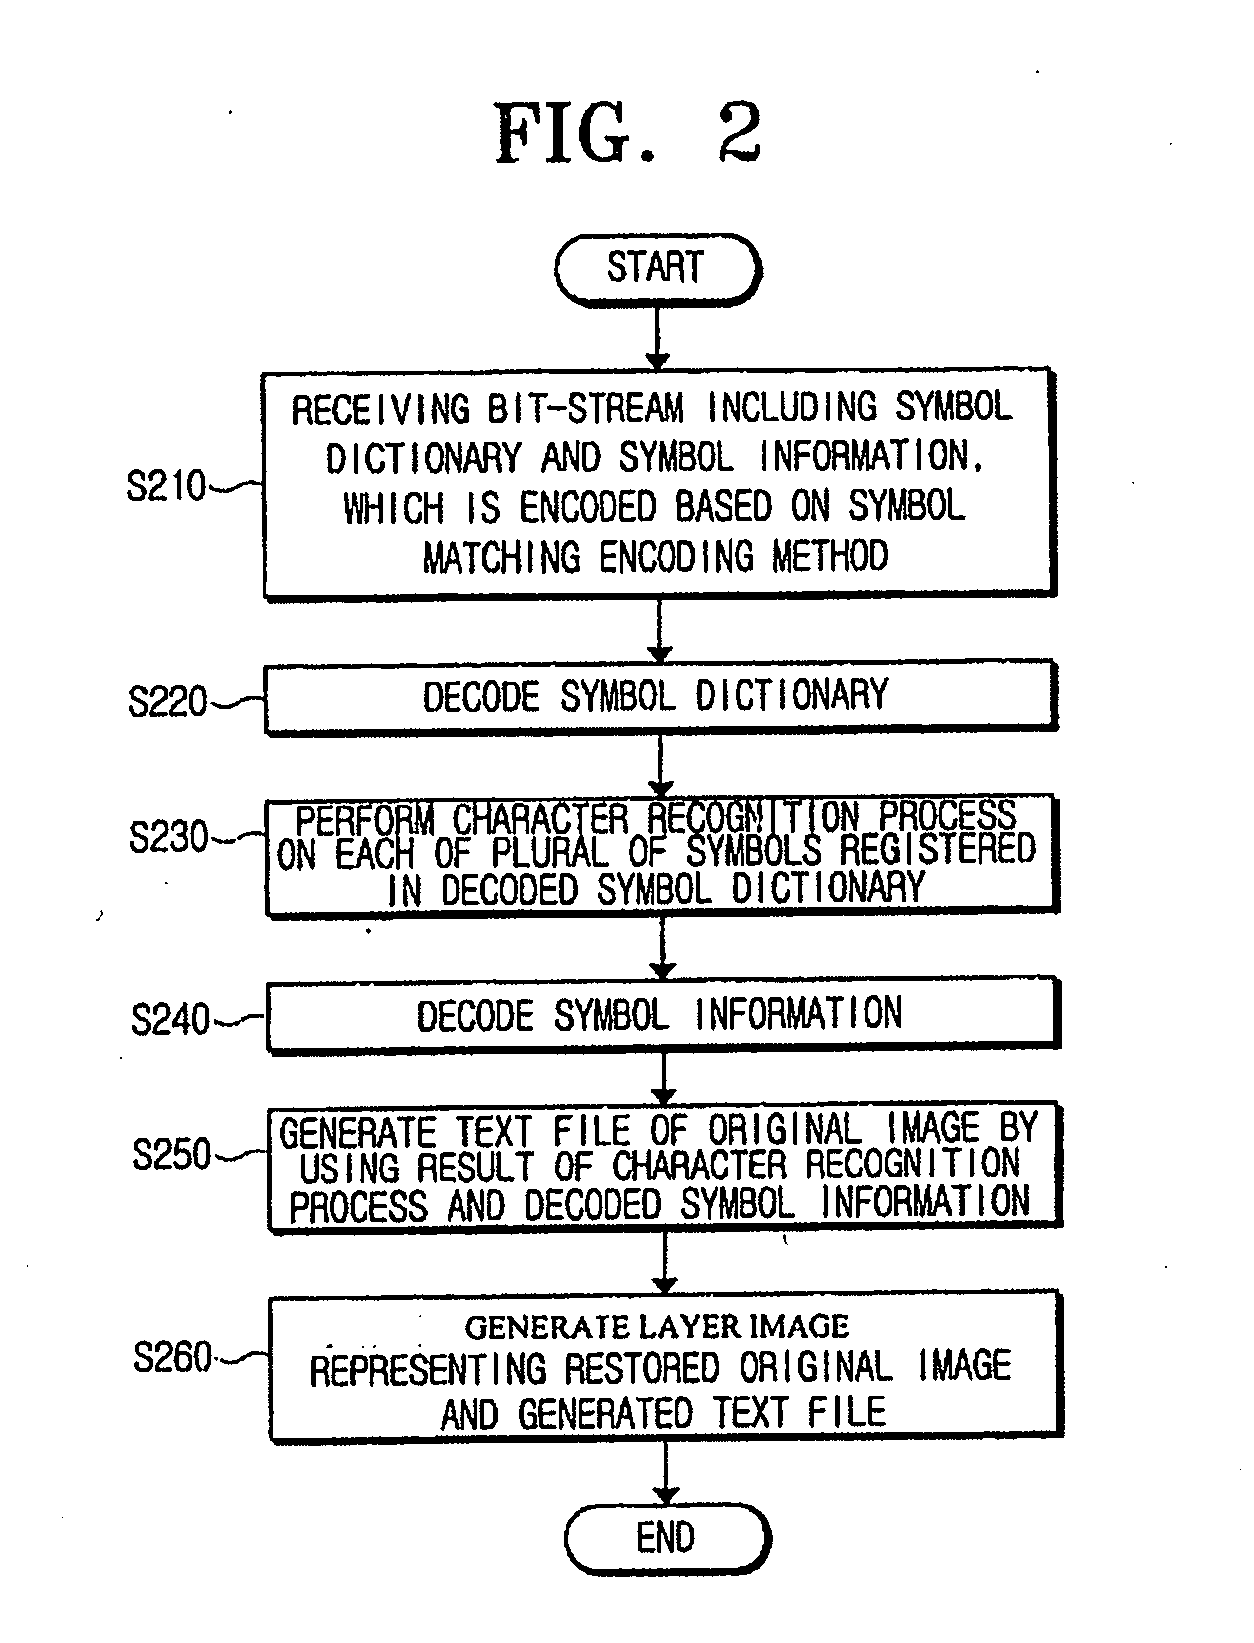 Apparatus and method for high-speed character recognition